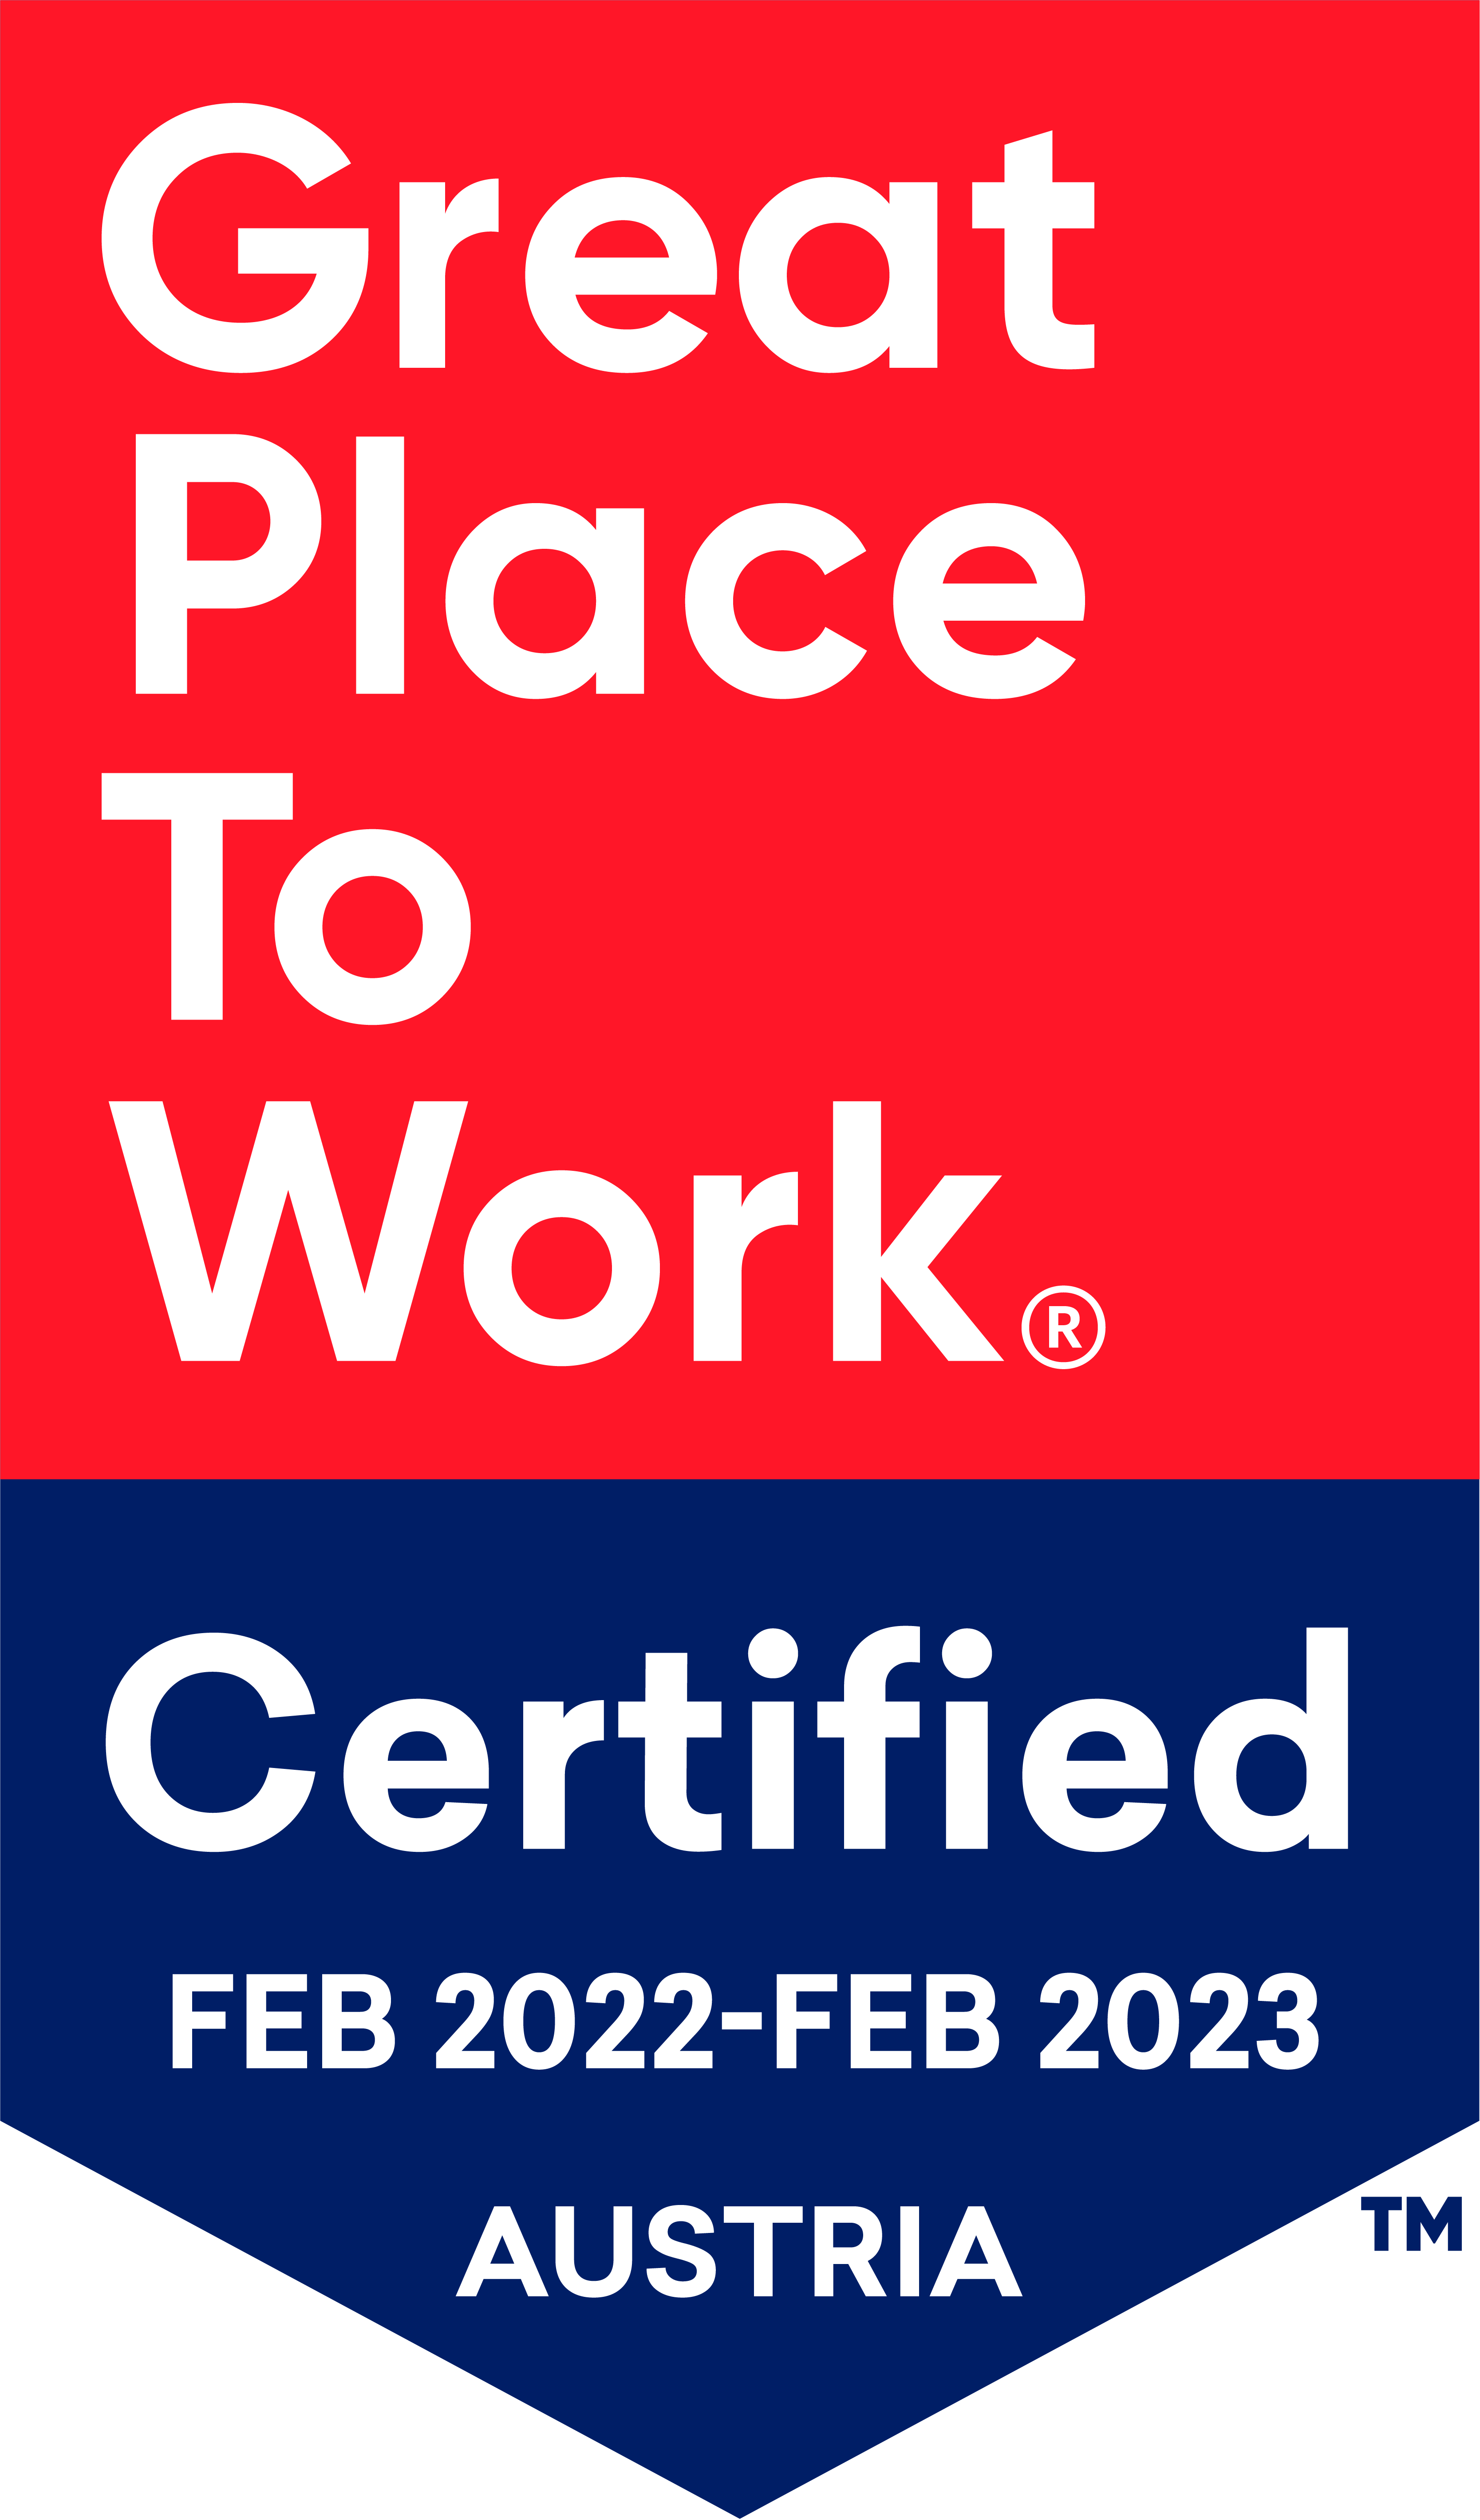 smec badge for Great Place To Work certified in Austria